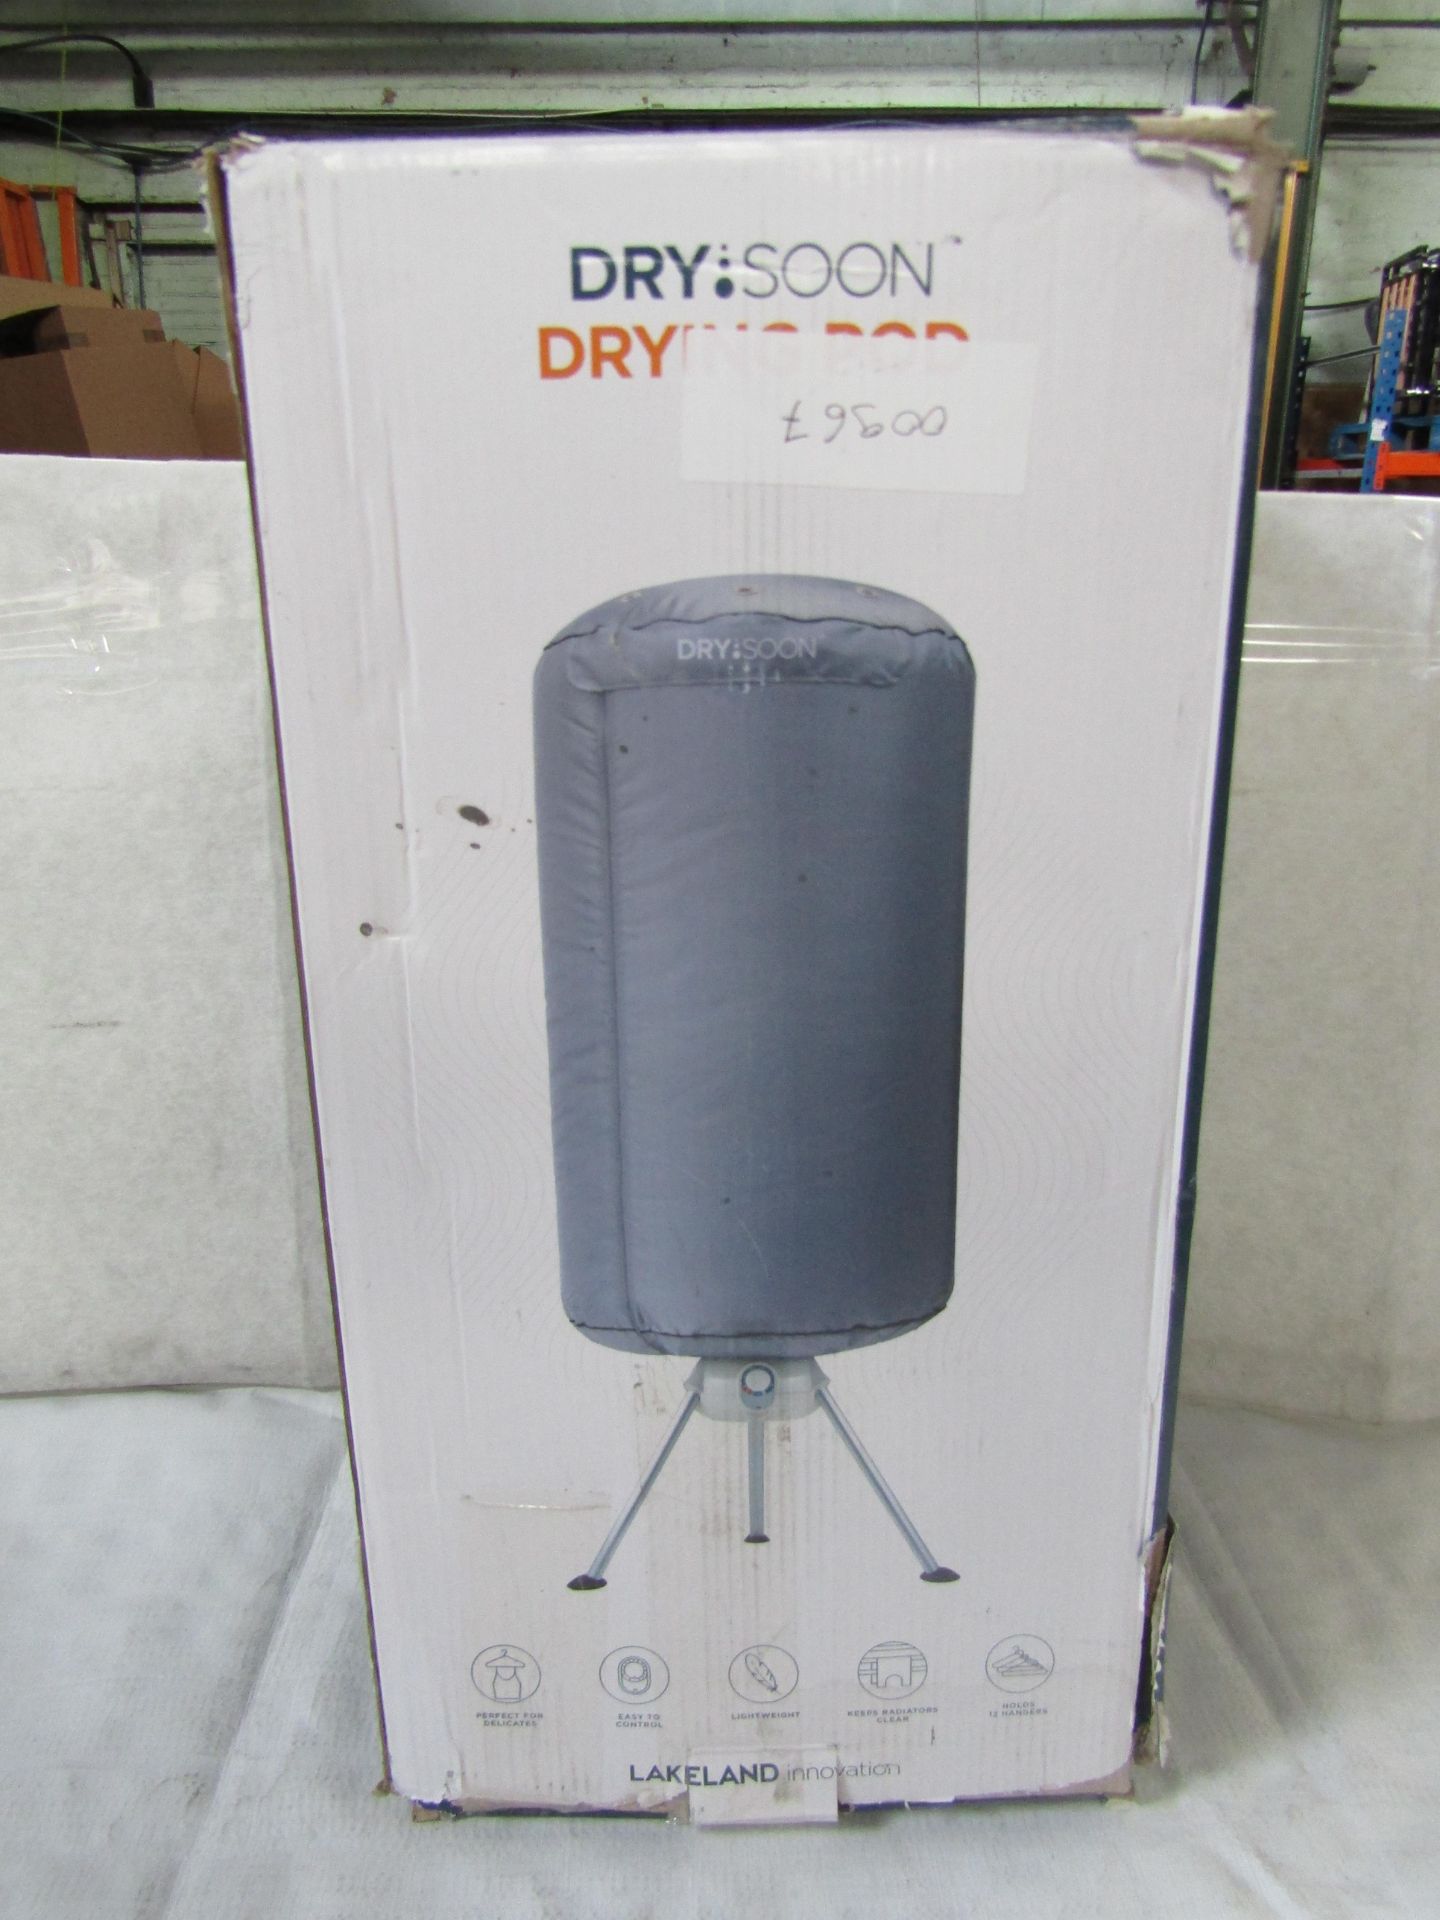 Dry:Soon Drying Pod RRP 70Move over radiators and tumble dryers: the Dry:Soon Drying Pod is in